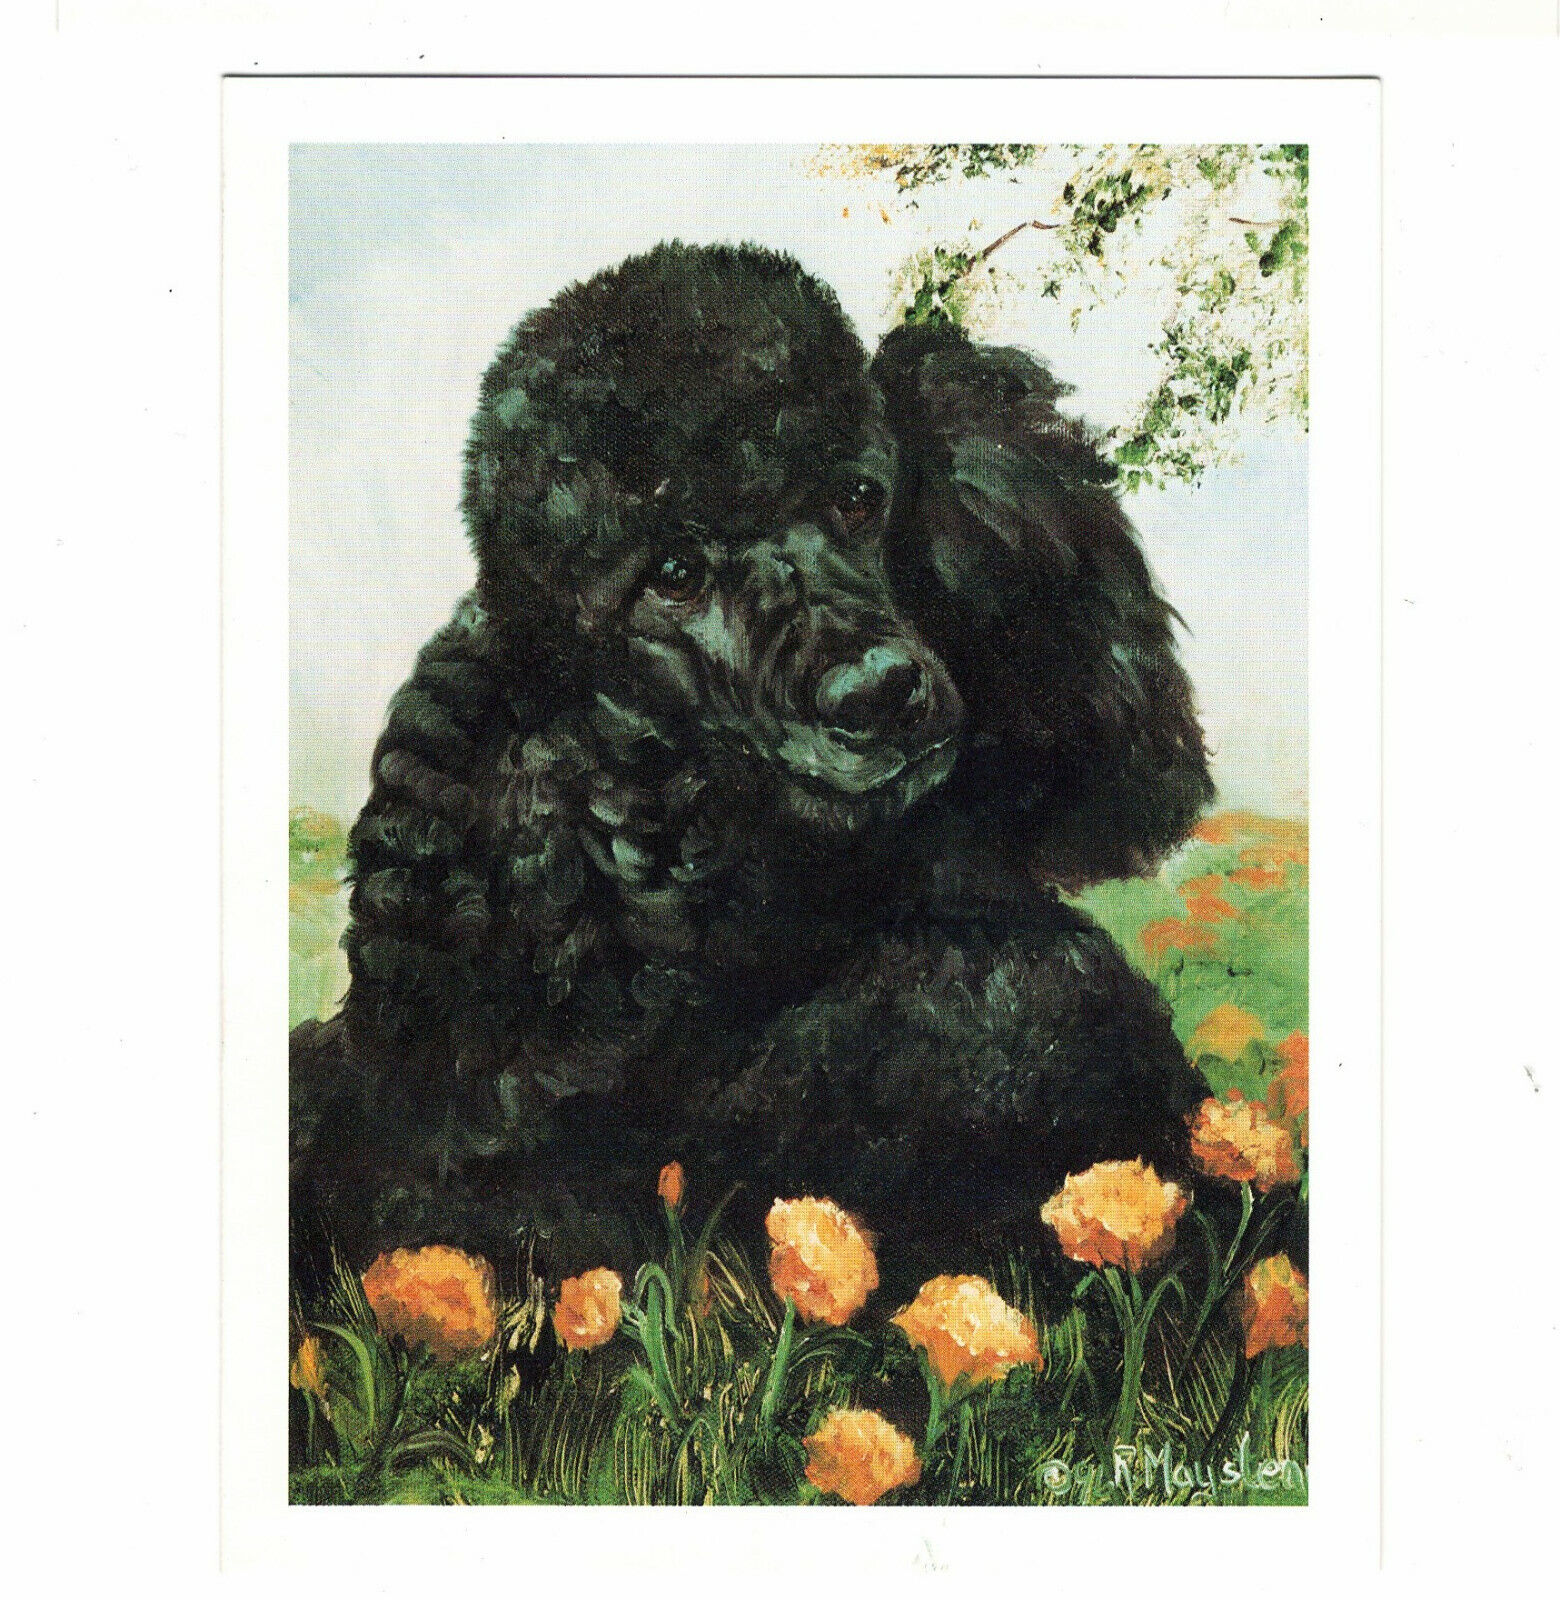 New Black Poodle With Flowers Notecard  Set 6 Blank Note Cards By Ruth Maystead